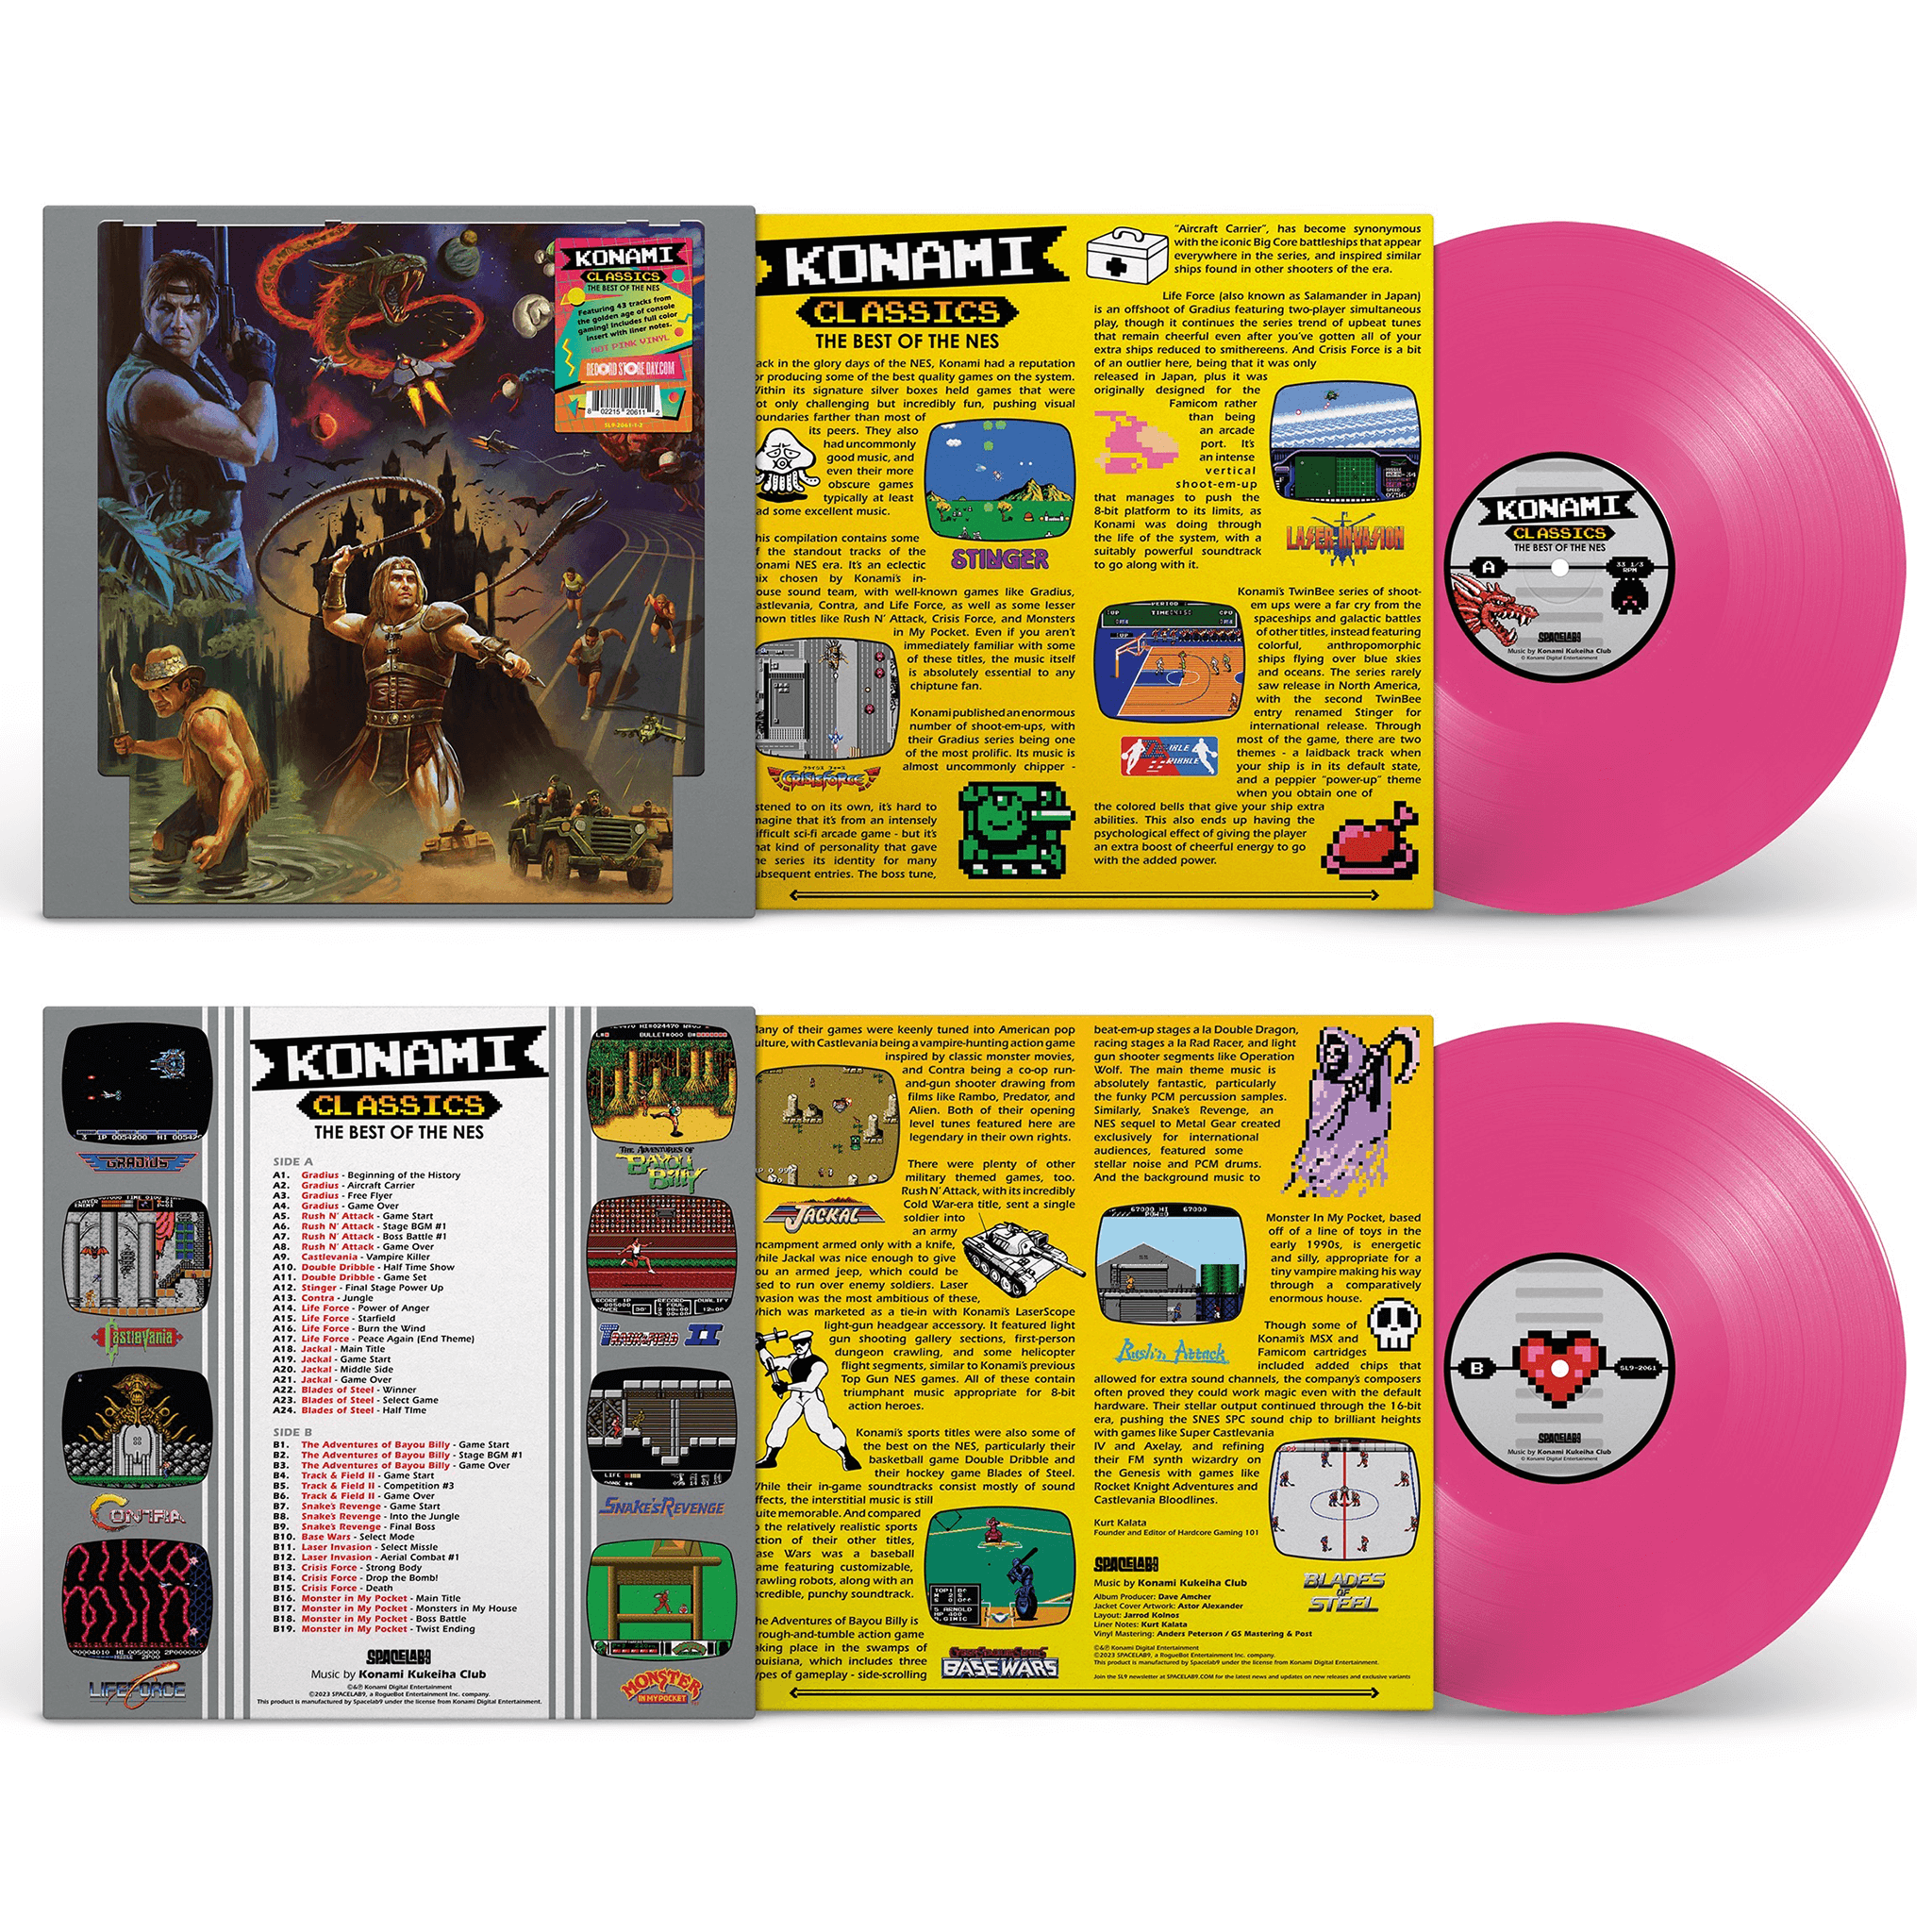 KONAMI CLASSICS: BEST OF THE NES LP - COMING SOON FOR BLACK FRIDAY RSD